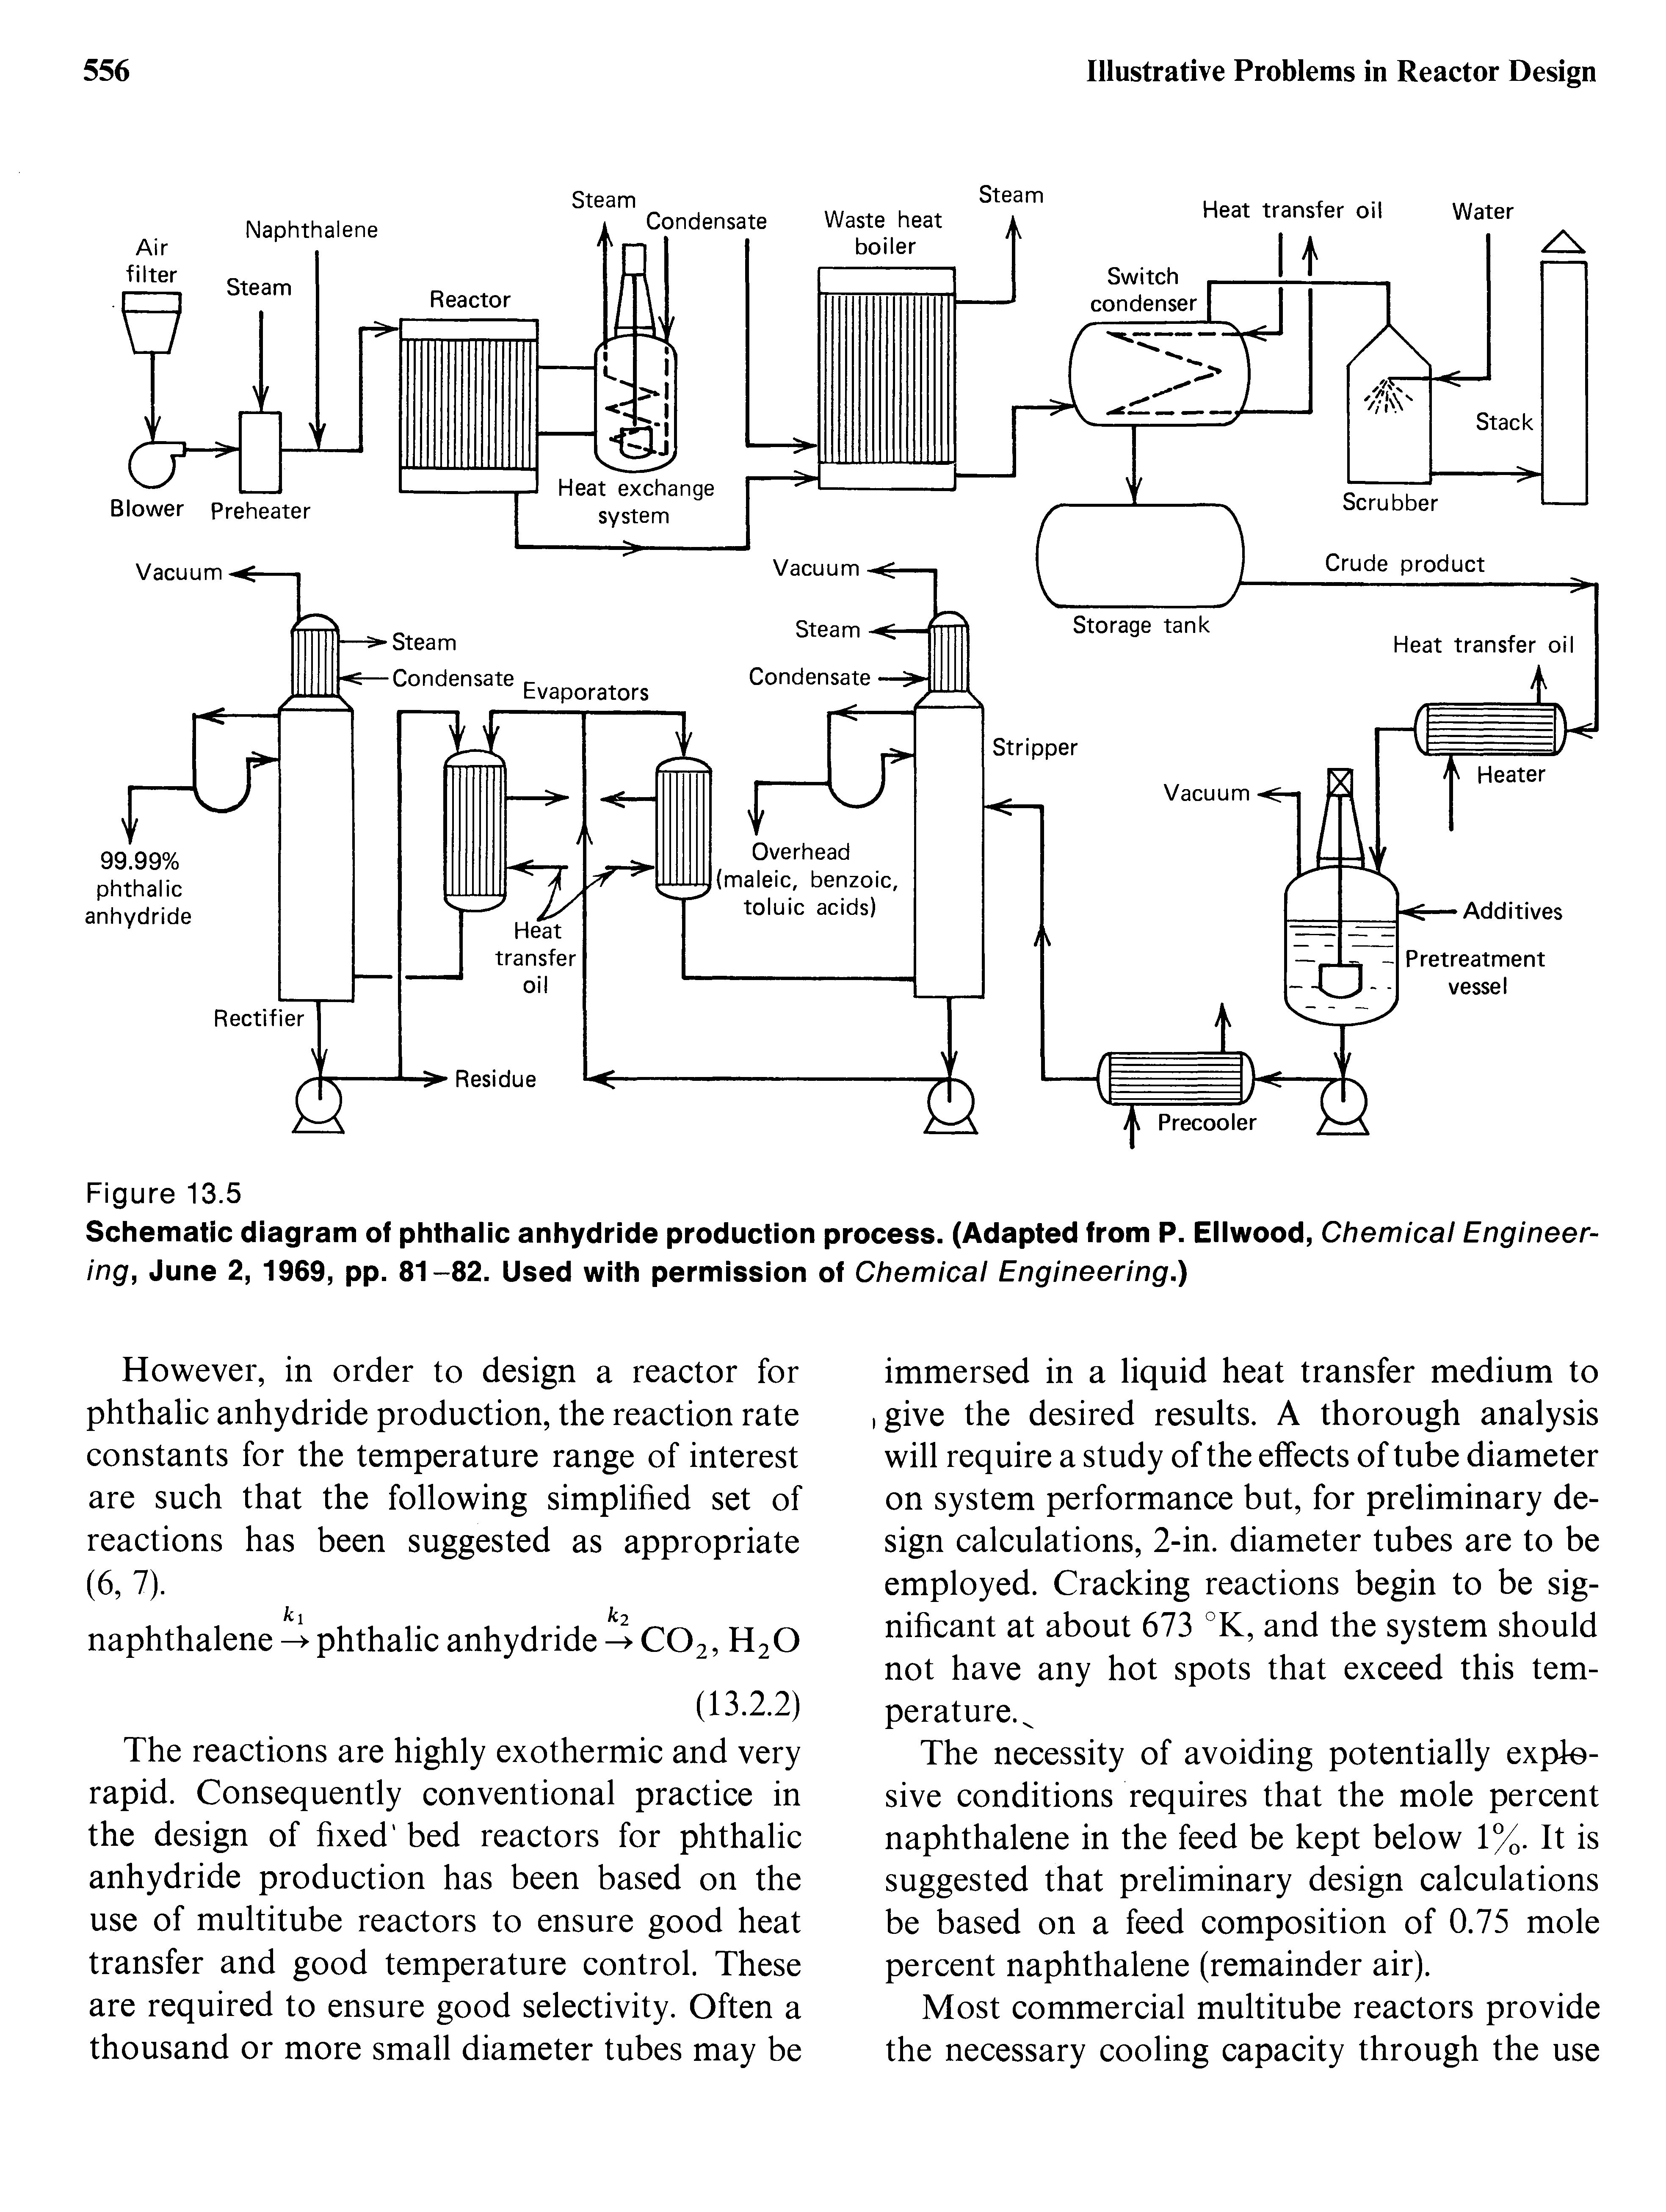 Schematic diagram of phthalic anhydride production process. (Adapted from P. Ellwood, Chemical Engineering, June 2, 1969, pp. 81-82. Used with permission of Chemical Engineering.)...